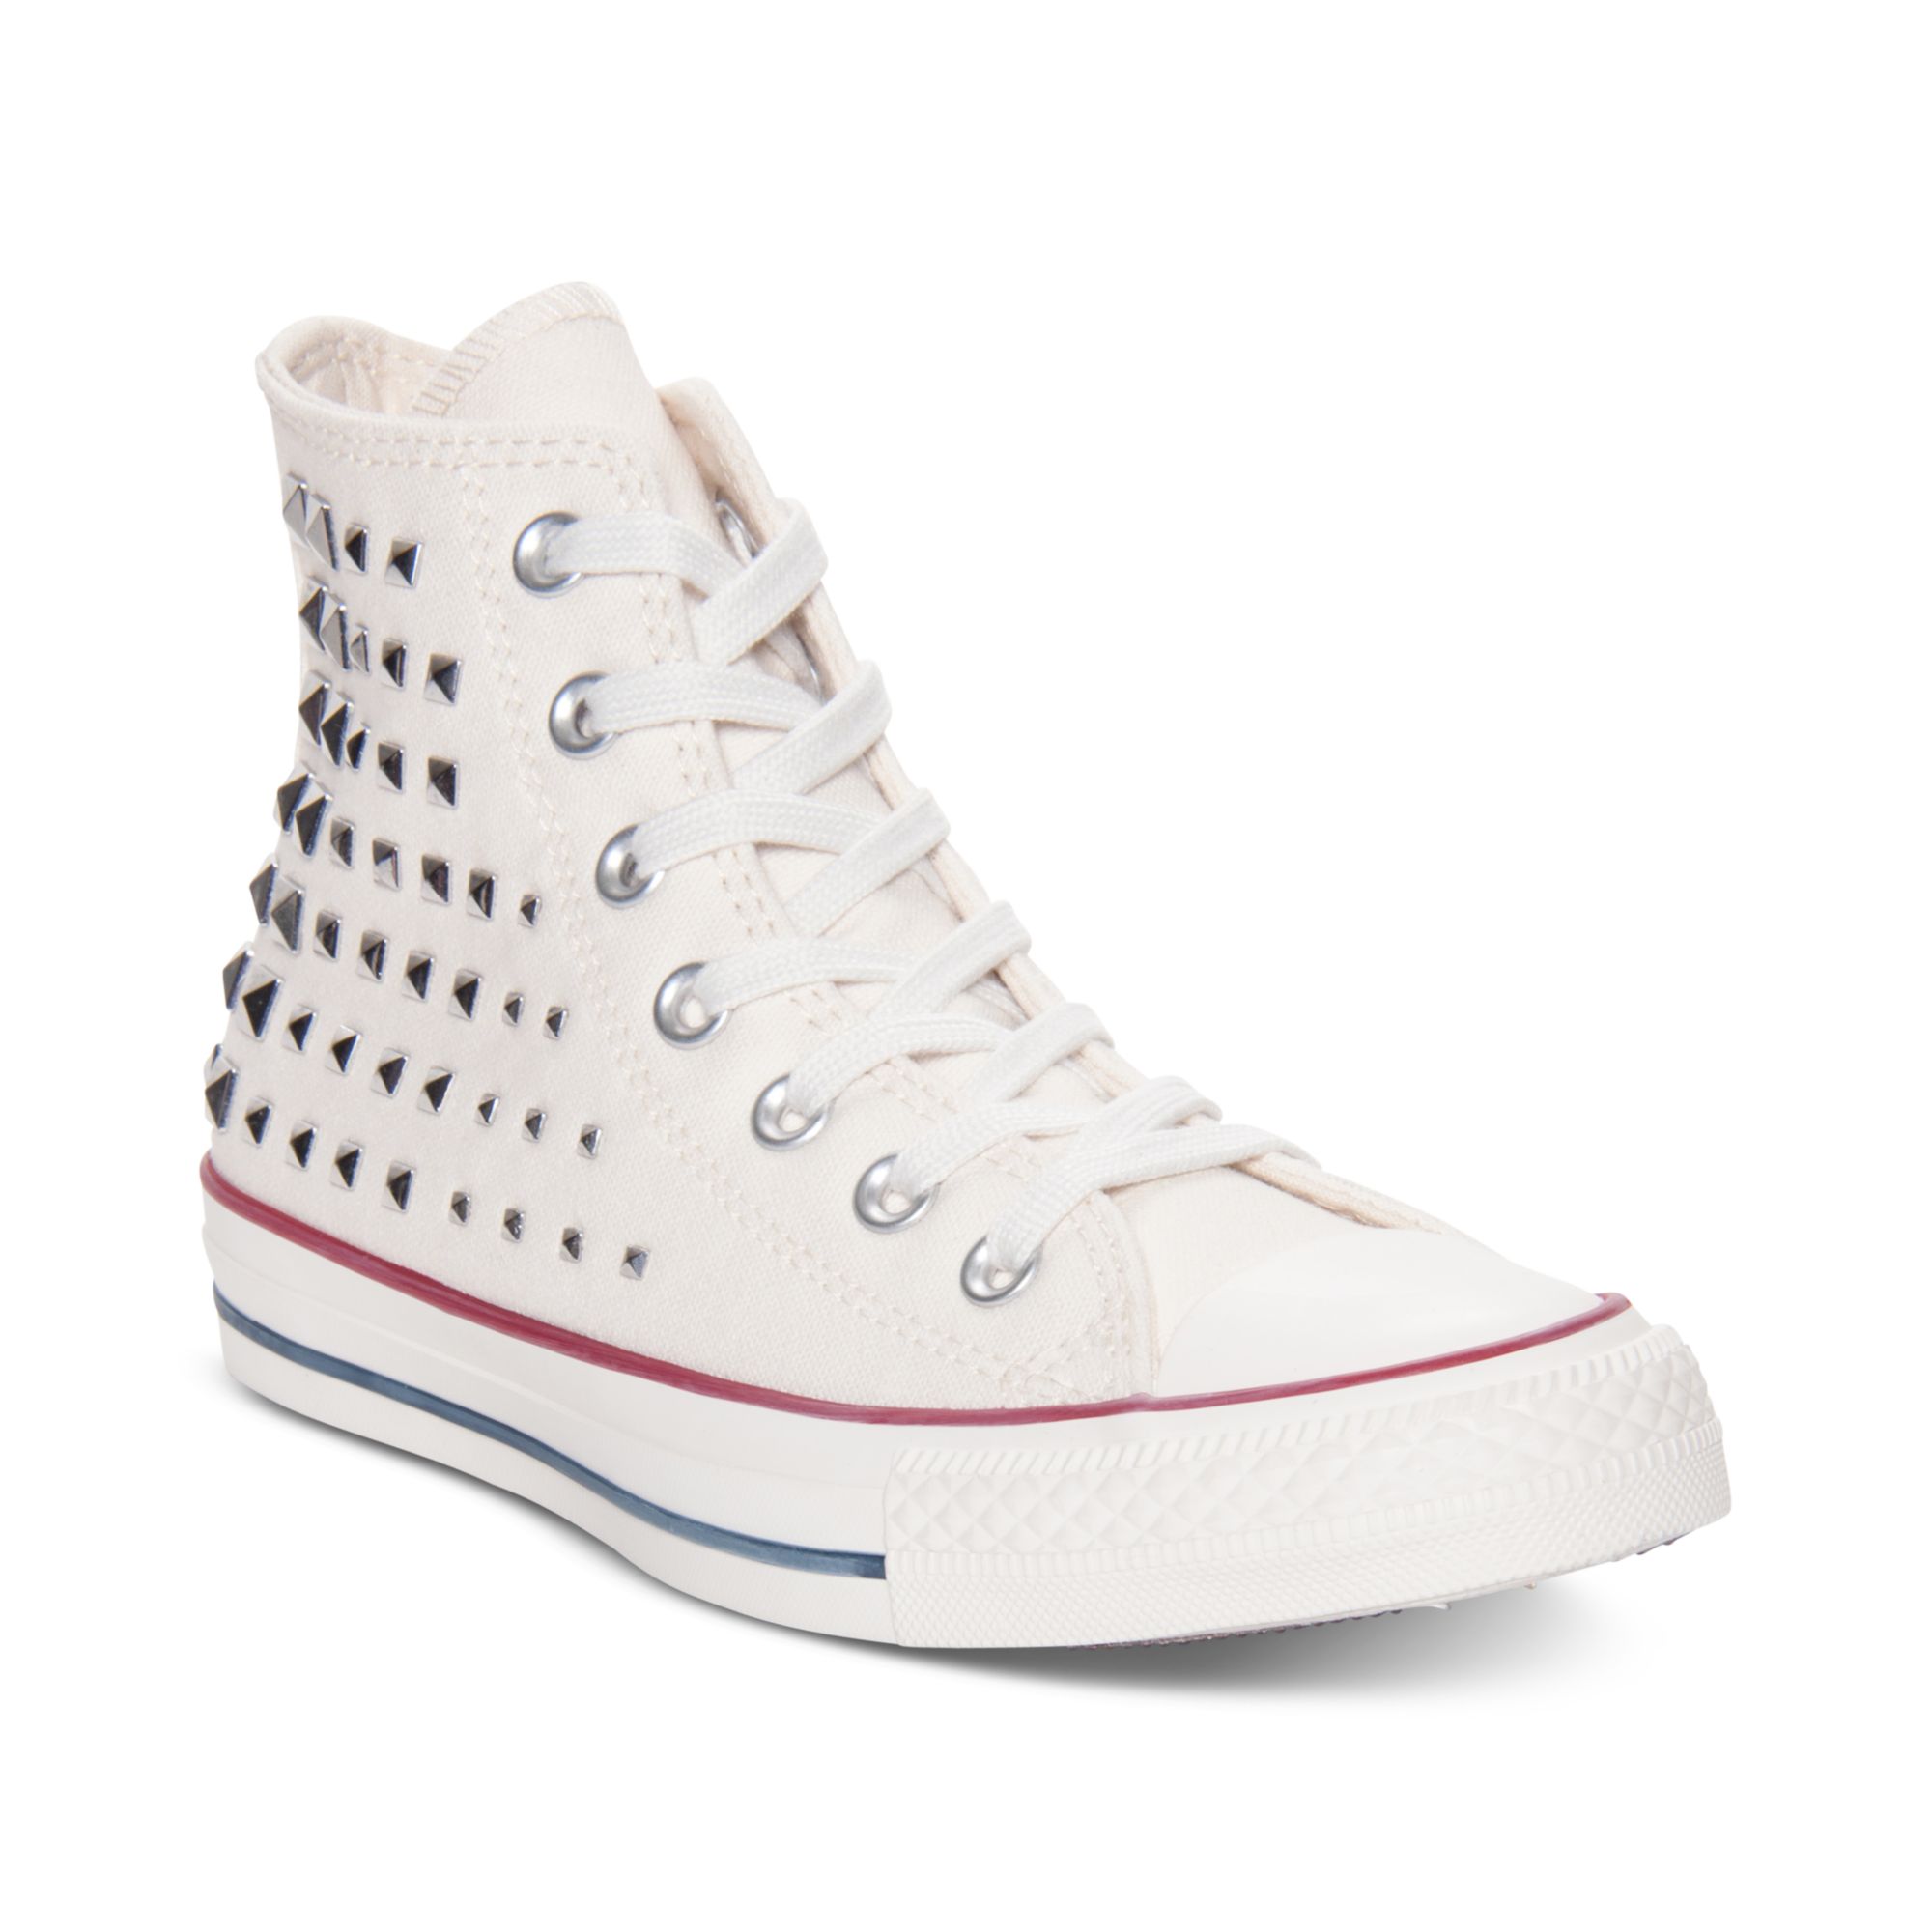 converse with studs high top